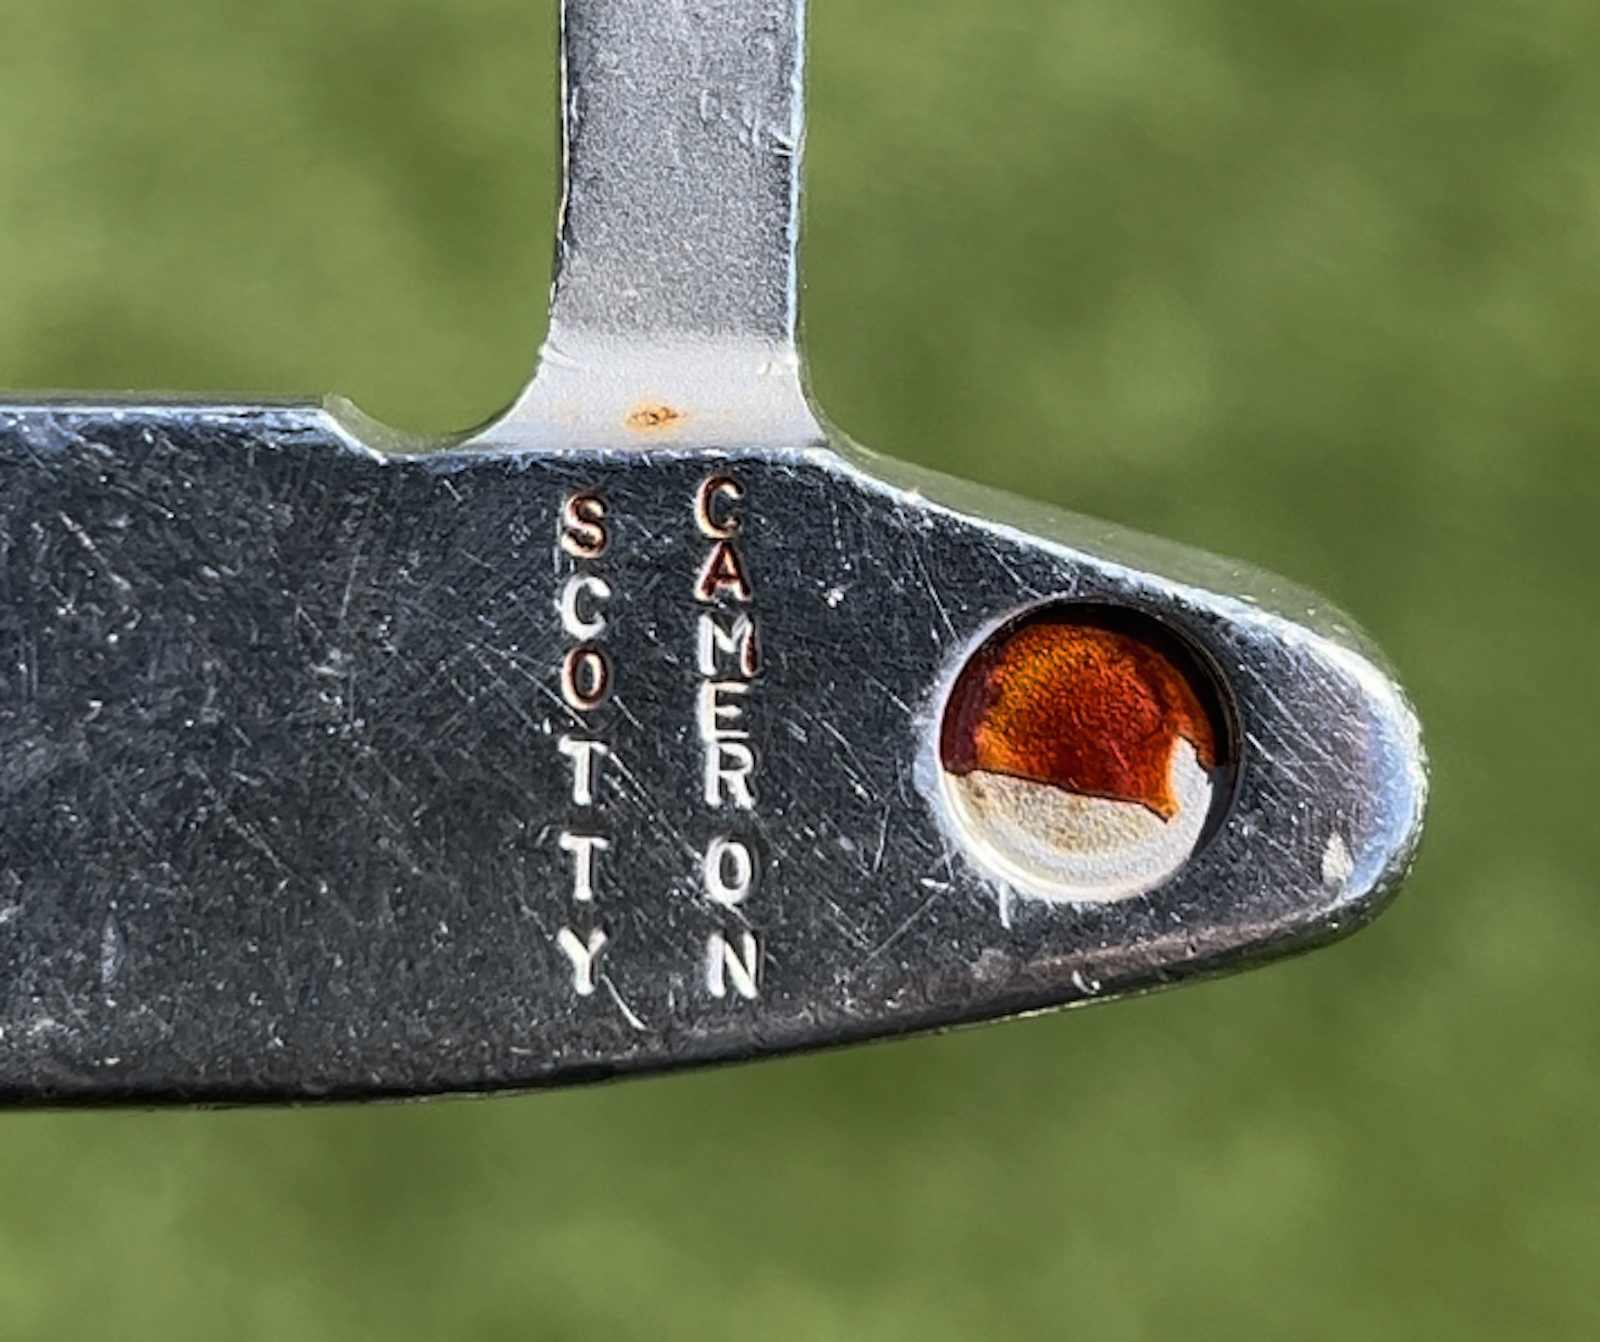 An UP-CLOSE look at Tiger Woods' famous Scotty Cameron putter